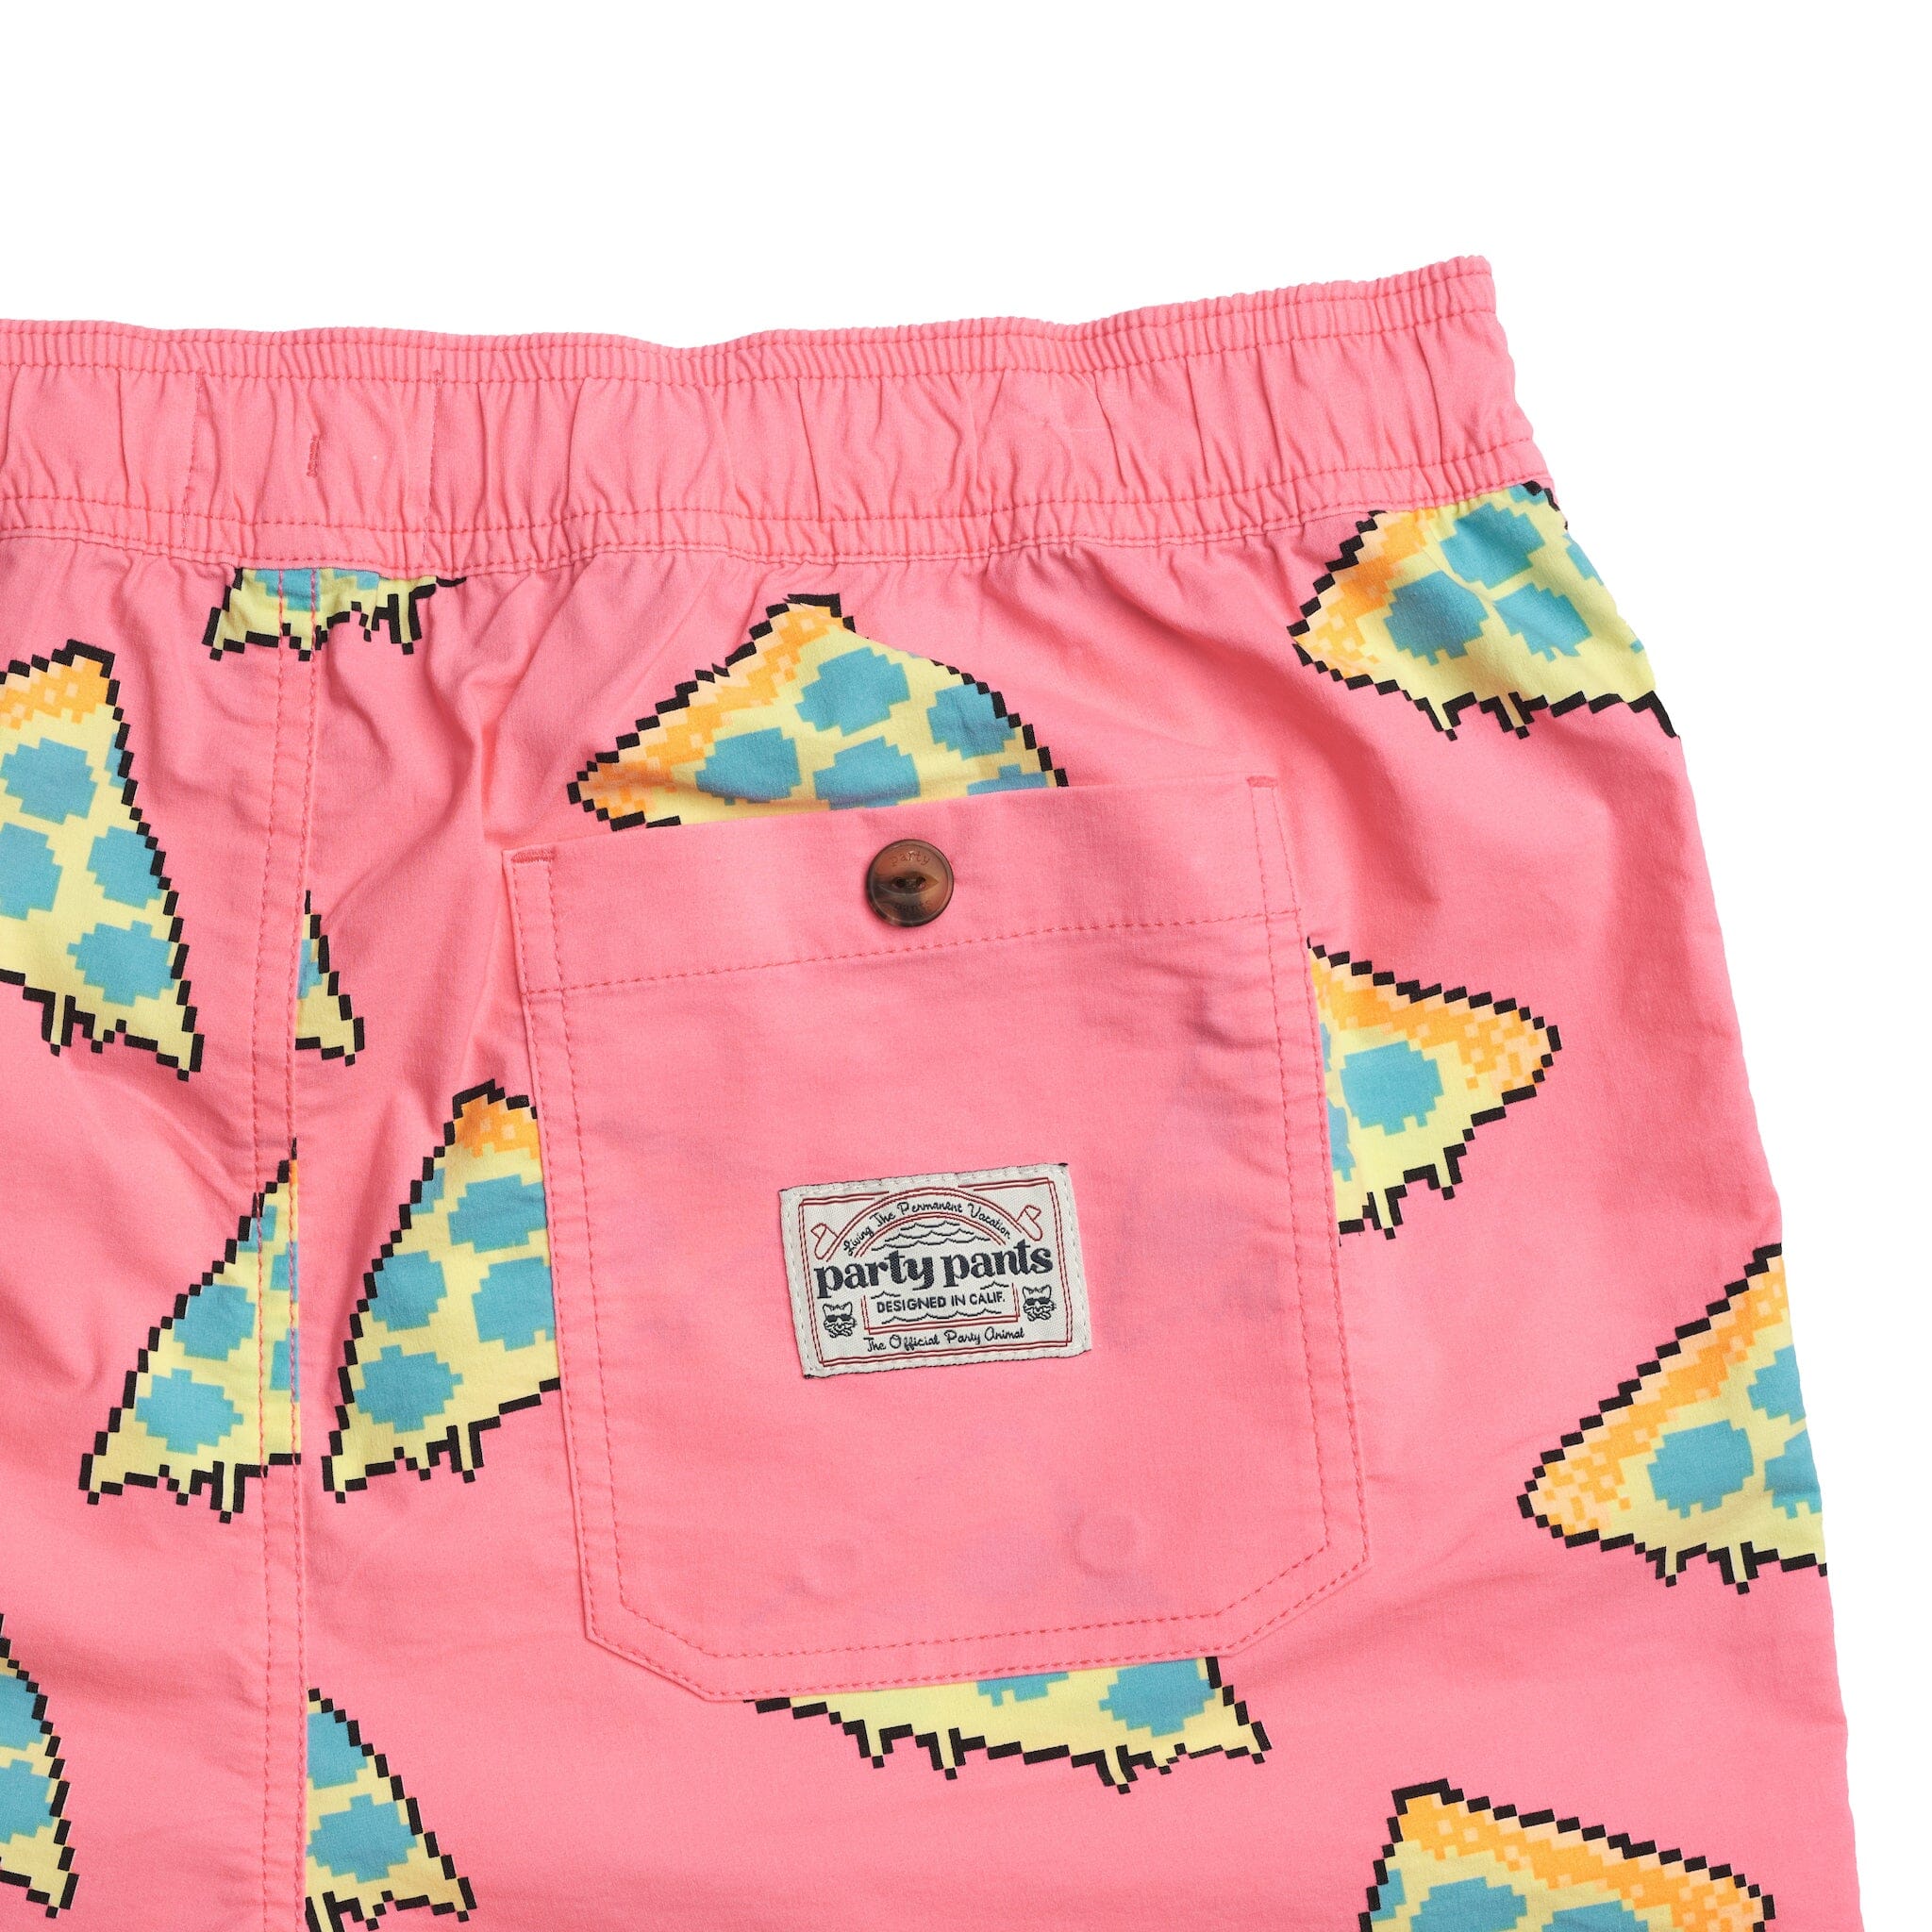 BAKED PARTY STARTER SHORT - PINK PRINTED SHORTS PARTY PANTS 